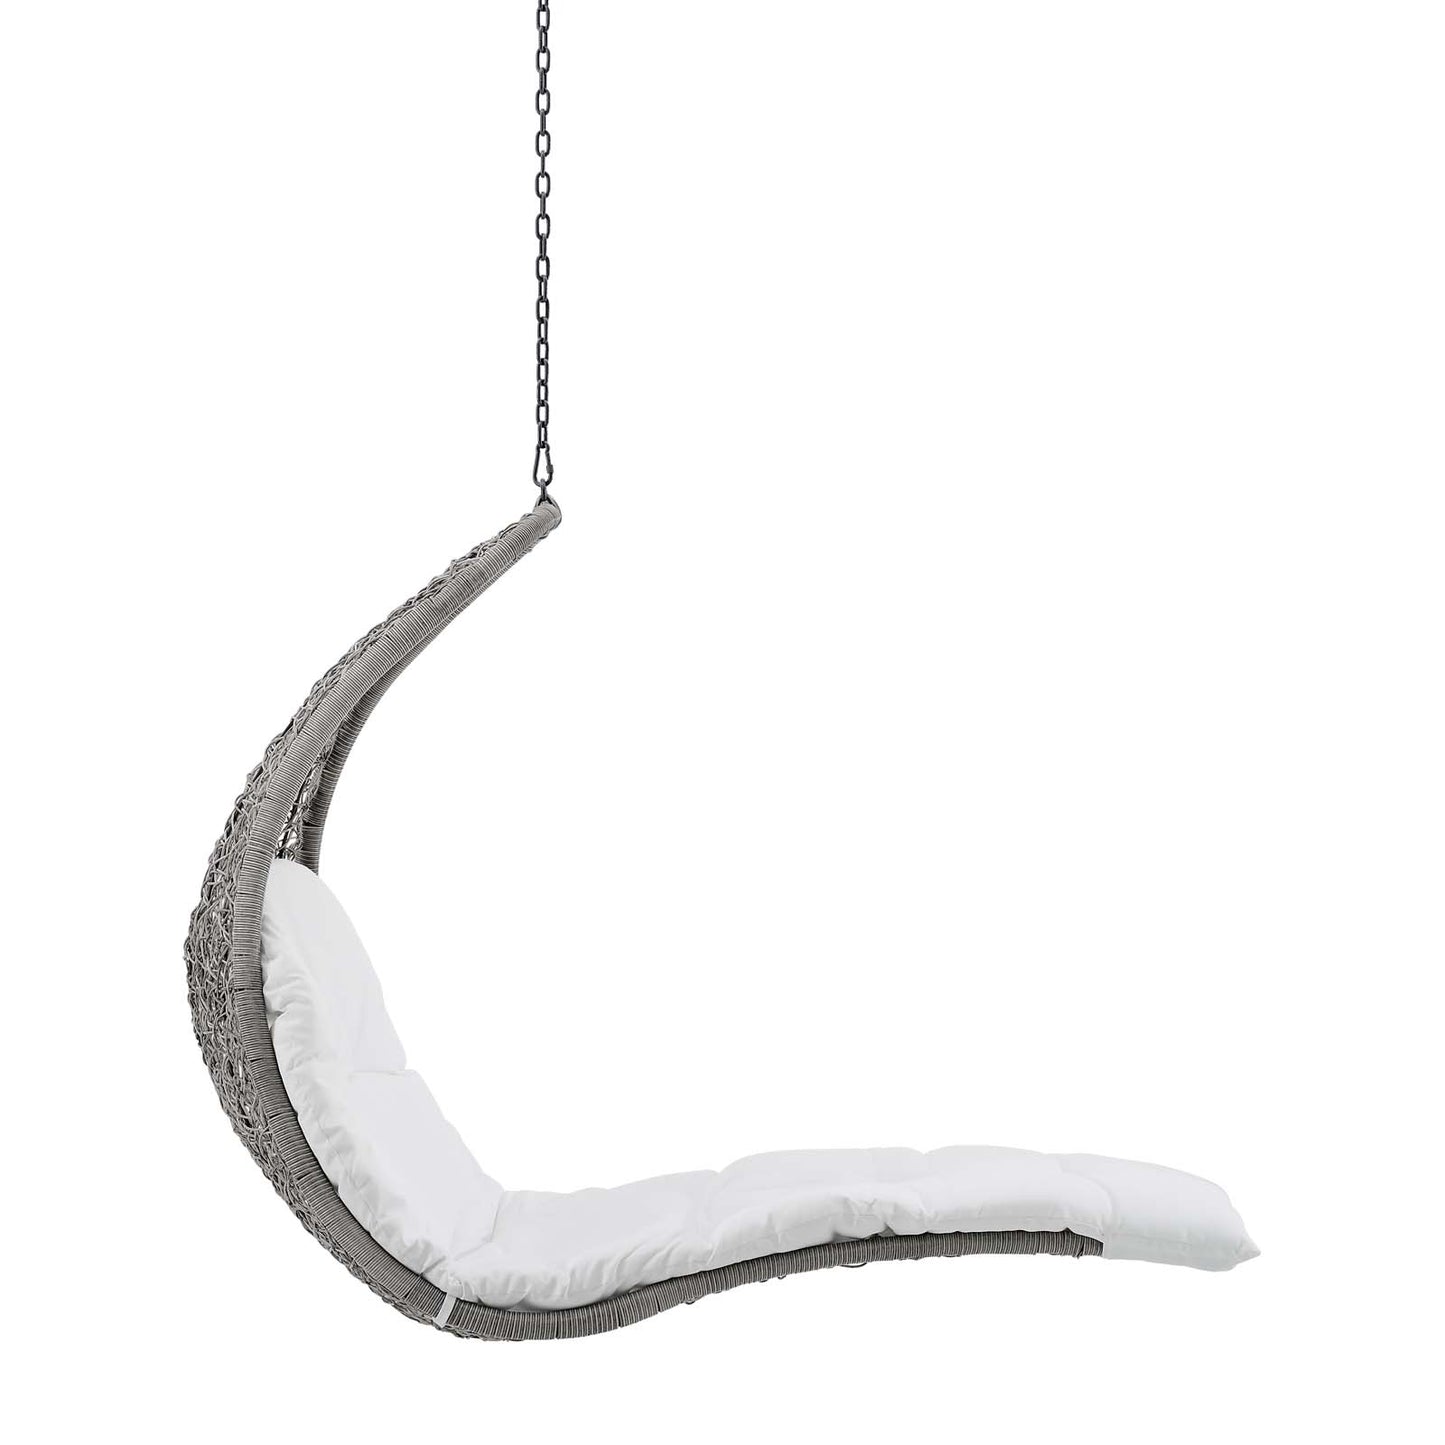 Landscape Hanging Chaise Lounge Outdoor Patio Swing Chair Light Gray White EEI-4589-LGR-WHI